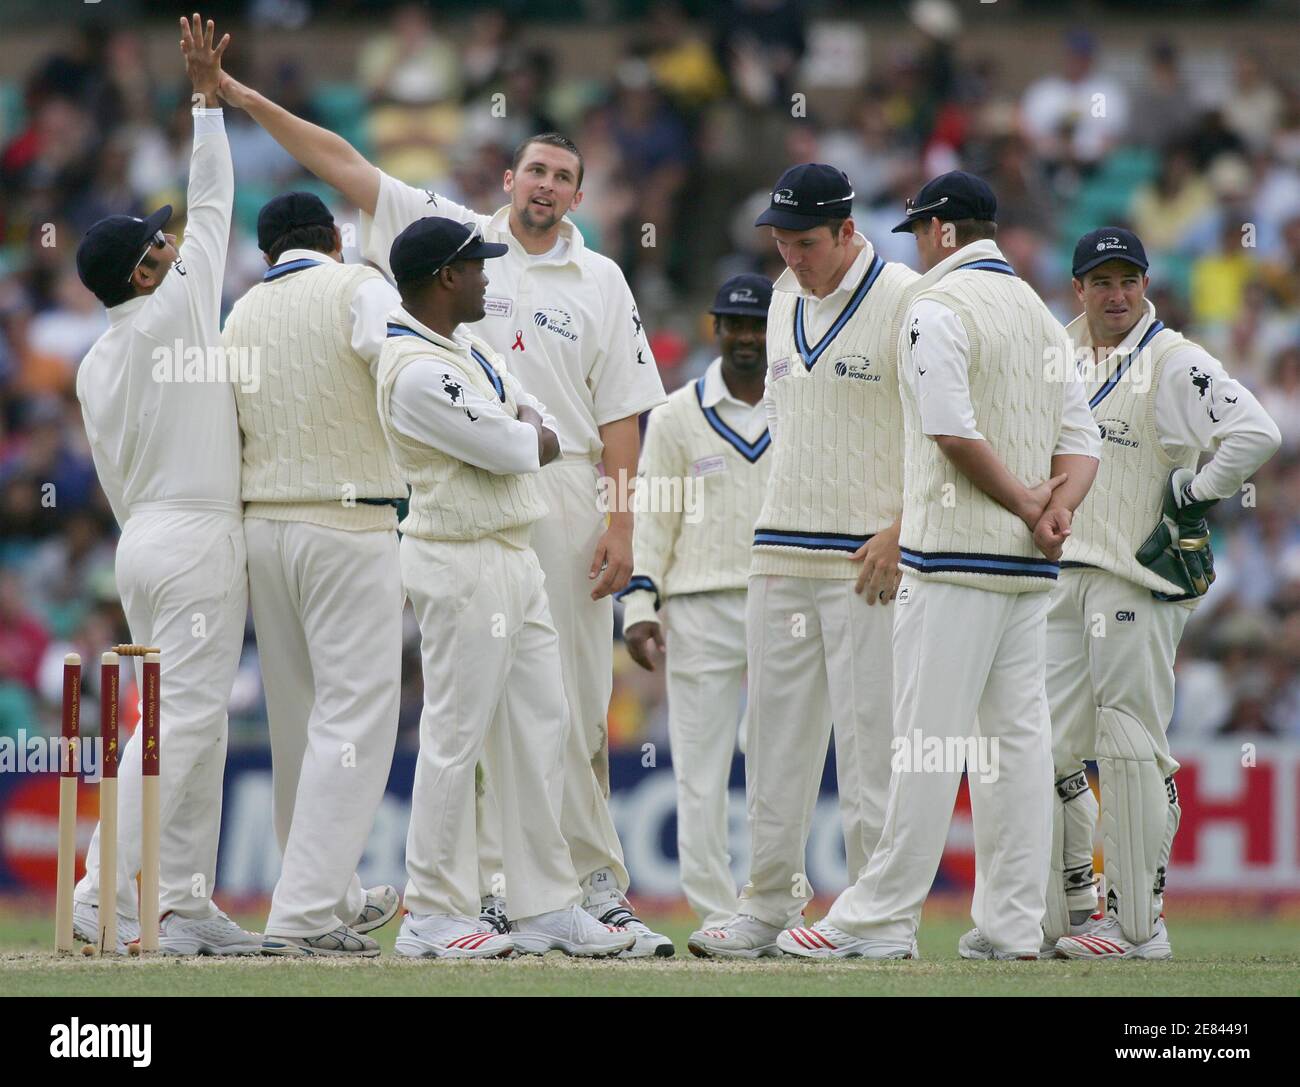 Steve Harmison of the World XI (4th left) is joined by team mates as he celebrates the wicket Matthew Hayden for 77 runs during day three of the Super Test in Sydney October 16, 2005. Australia are playing the World XI team in a one-off test match, after winning all three limited day matches in Melbourne last week. REUTERS/Will Burgess Foto de stock